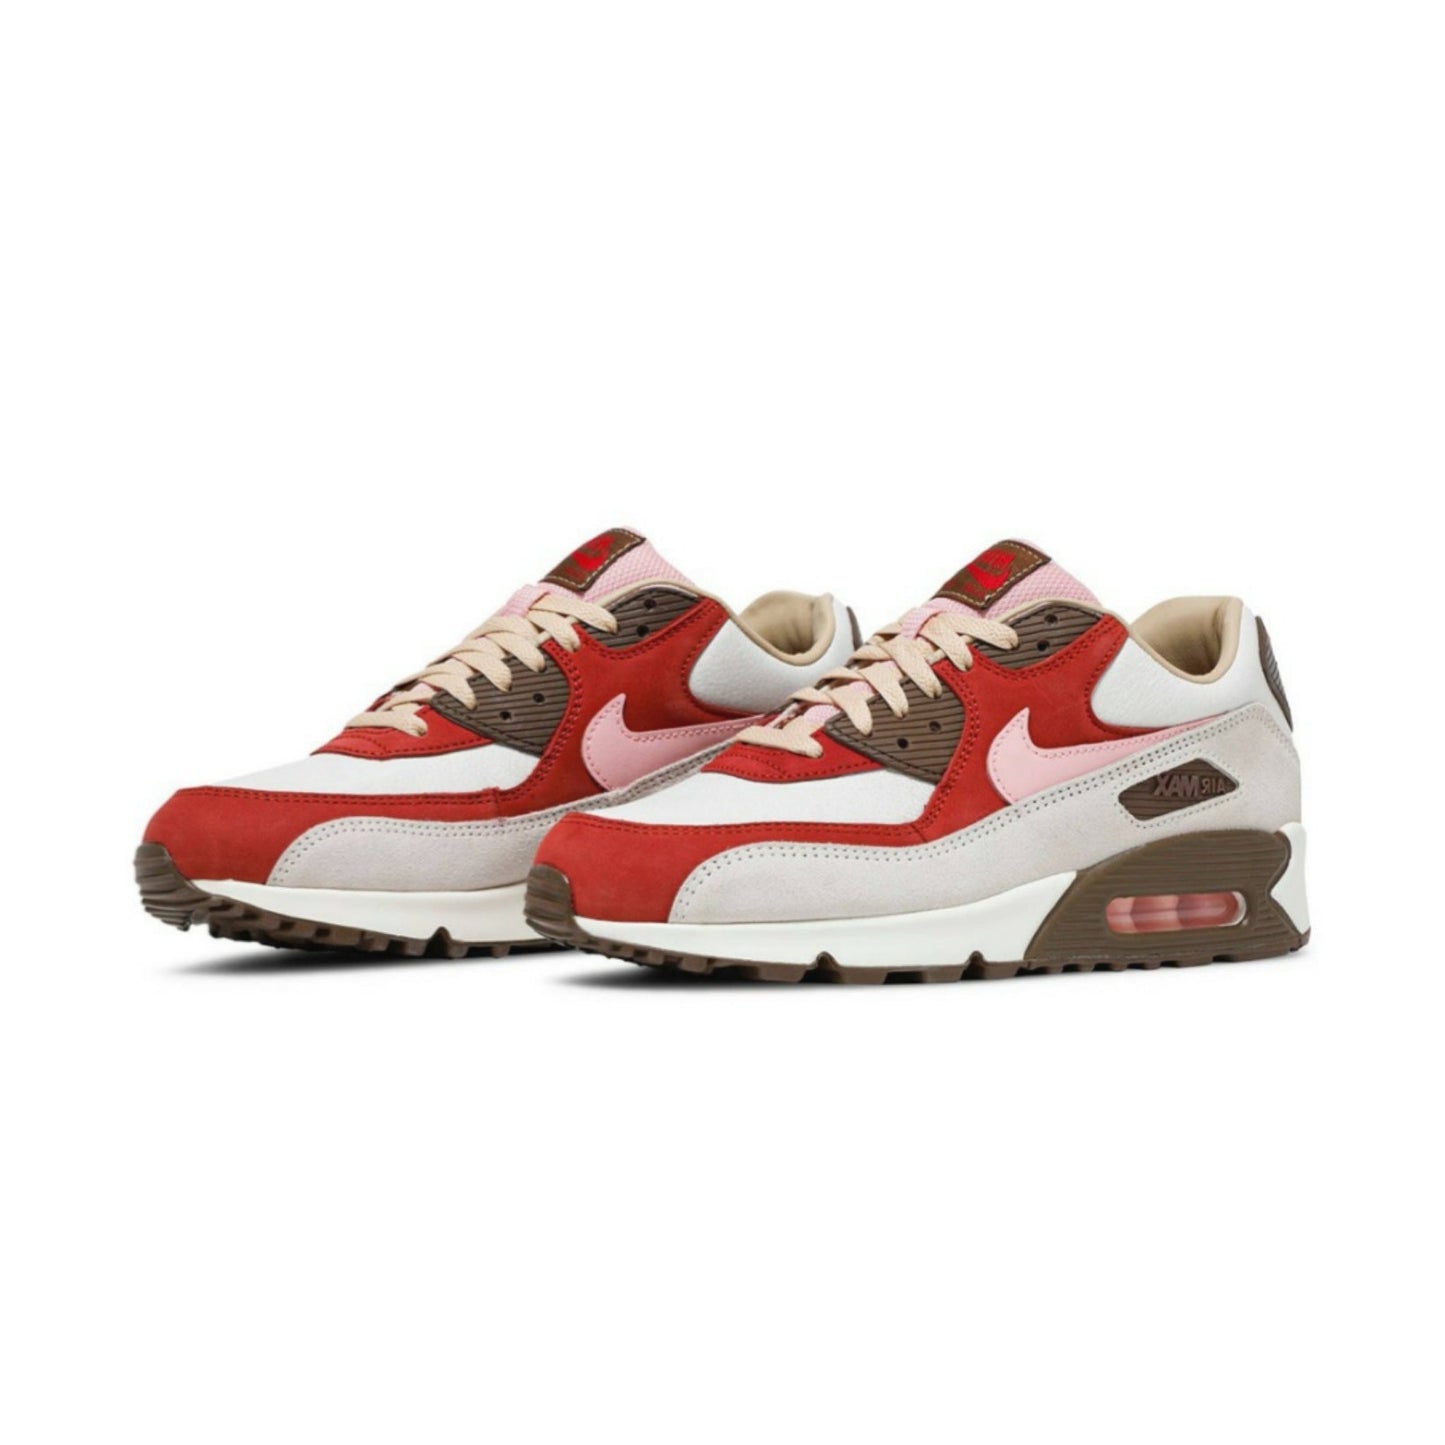 Air Max 90 NRG Bacon 2021 By Nike – SoleMate Sneakers